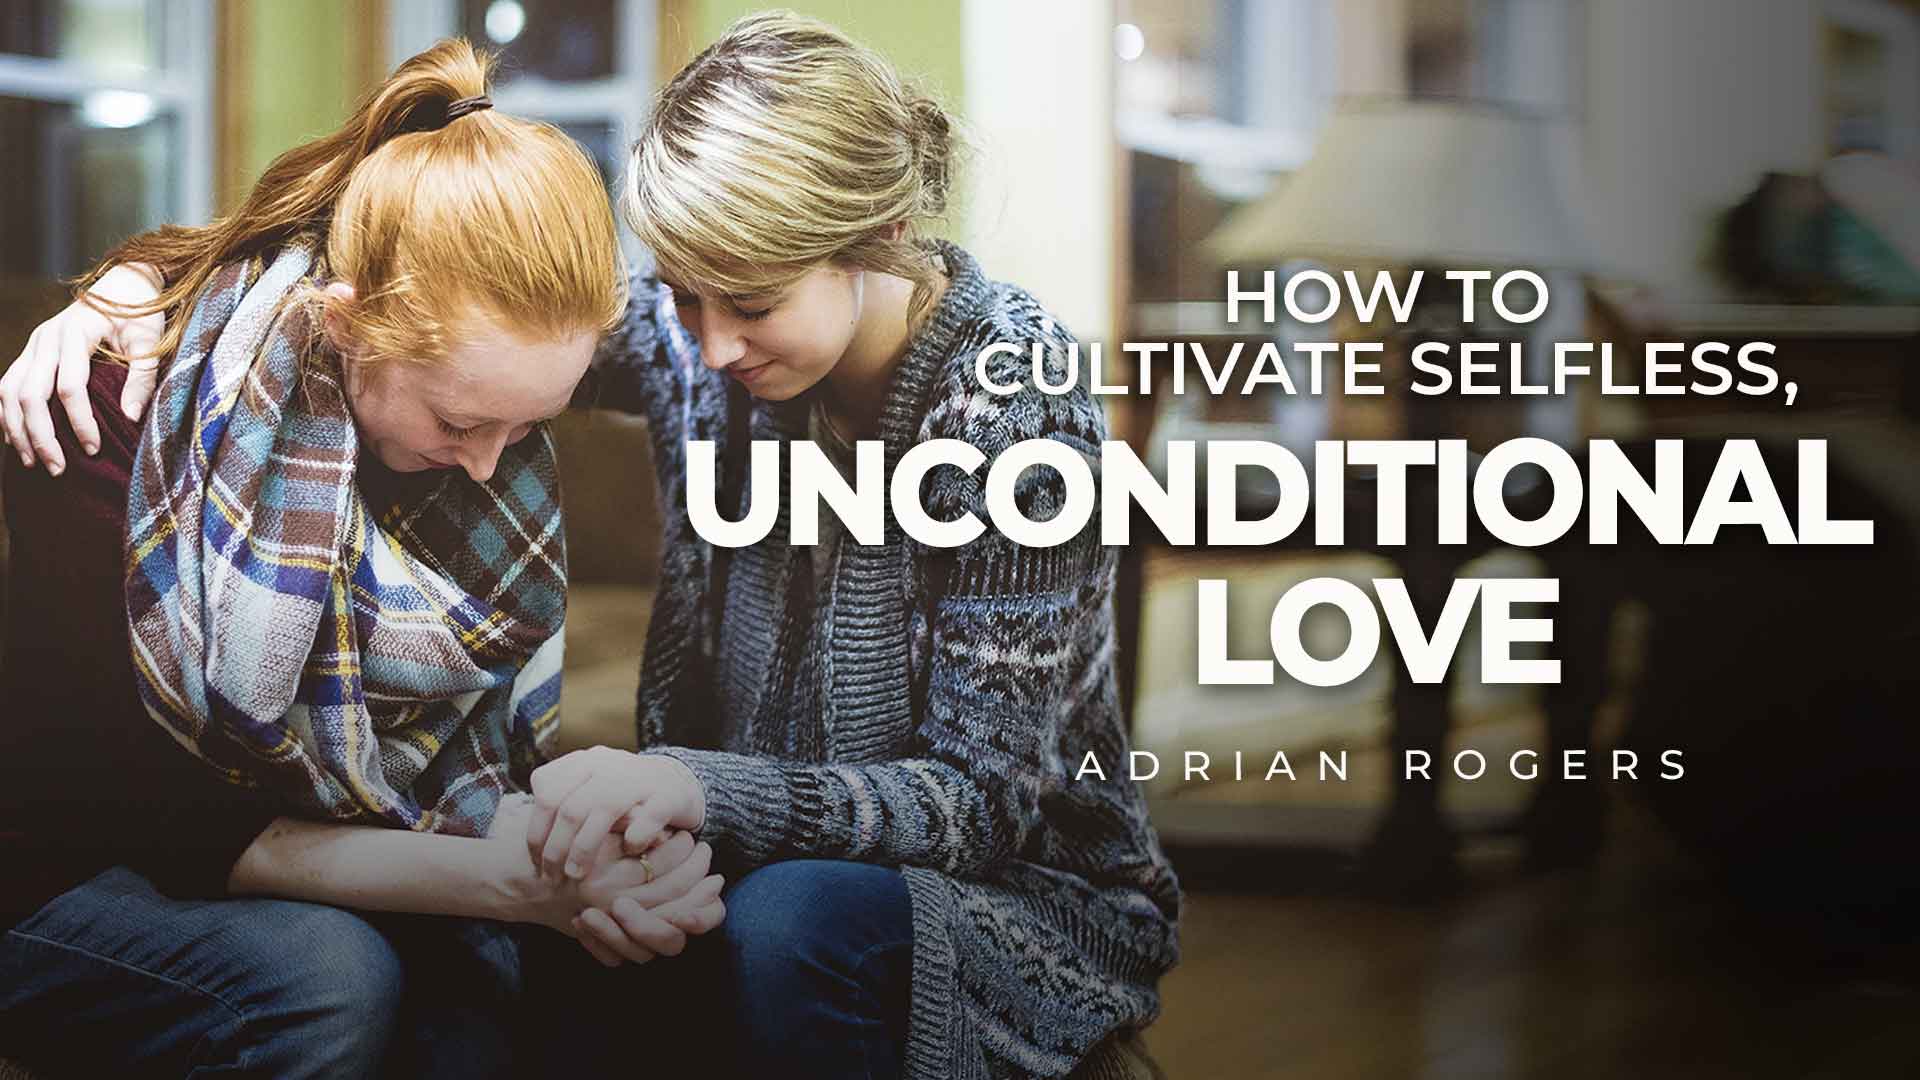 How to Cultivate Selfless, Unconditional Love 1920x1080